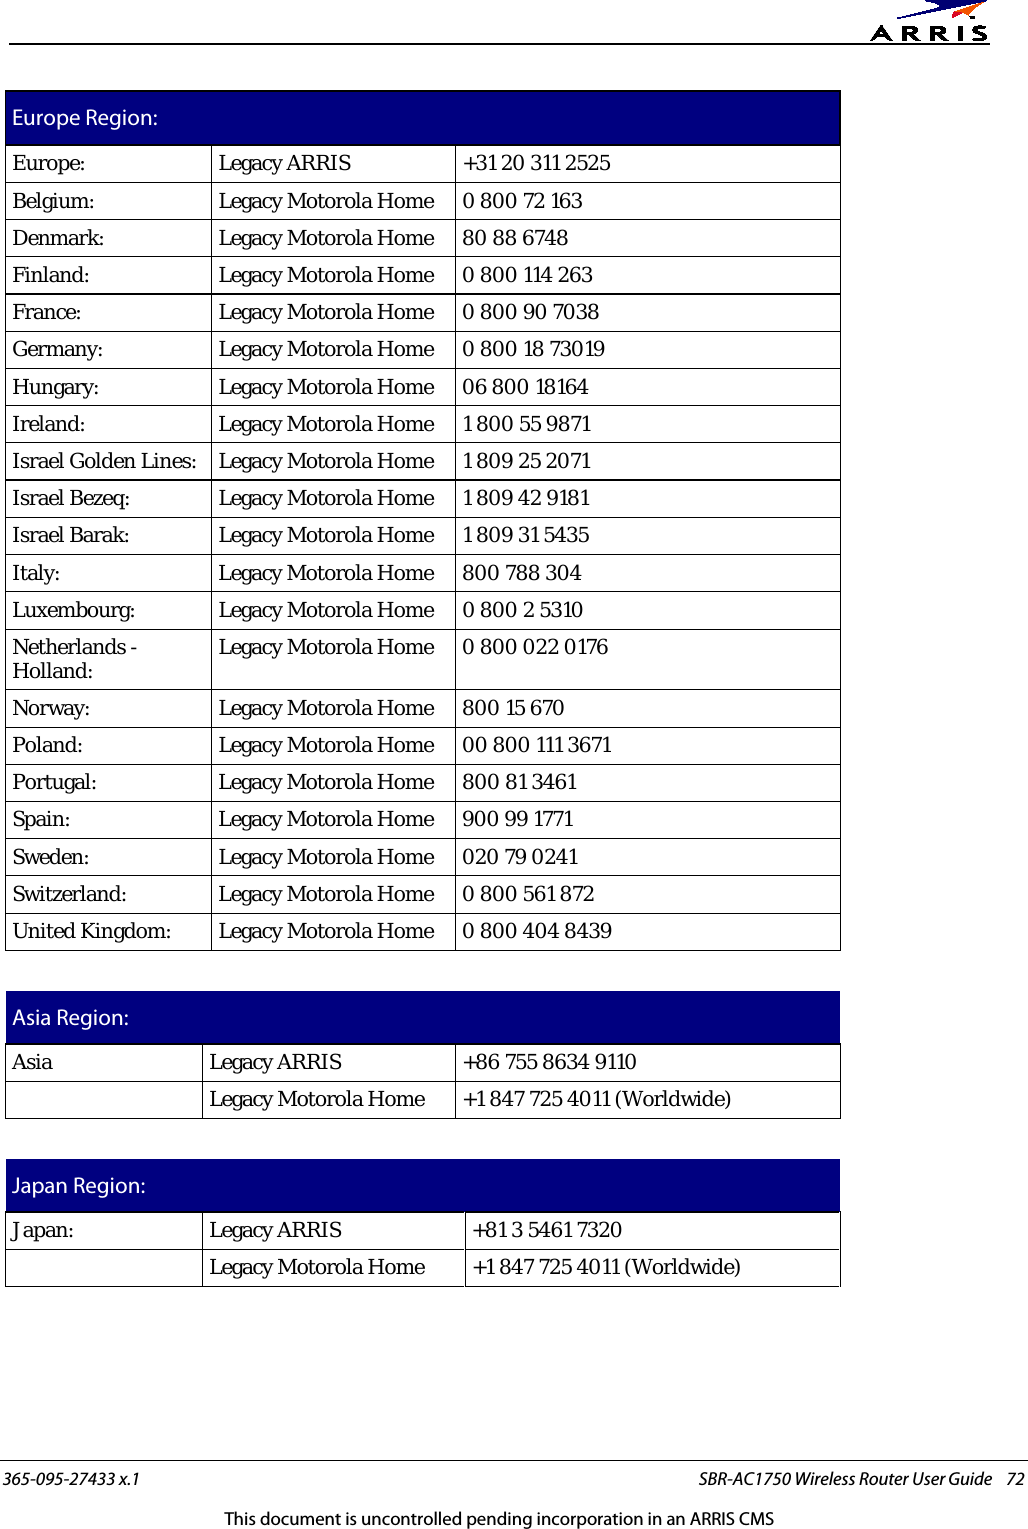      365-095-27433 x.1 SBR-AC1750 Wireless Router User Guide    72 This document is uncontrolled pending incorporation in an ARRIS CMS Europe Region: Europe:  Legacy ARRIS +31 20 311 2525 Belgium: Legacy Motorola Home 0 800 72 163 Denmark: Legacy Motorola Home 80 88 6748 Finland:  Legacy Motorola Home 0 800 114 263 France:  Legacy Motorola Home 0 800 90 7038 Germany: Legacy Motorola Home 0 800 18 73019 Hungary:  Legacy Motorola Home 06 800 18164 Ireland:  Legacy Motorola Home 1 800 55 9871 Israel Golden Lines:  Legacy Motorola Home 1 809 25 2071 Israel Bezeq: Legacy Motorola Home 1 809 42 9181 Israel Barak: Legacy Motorola Home 1 809 31 5435 Italy: Legacy Motorola Home 800 788 304 Luxembourg: Legacy Motorola Home 0 800 2 5310 Netherlands - Holland: Legacy Motorola Home 0 800 022 0176 Norway: Legacy Motorola Home 800 15 670 Poland: Legacy Motorola Home 00 800 111 3671 Portugal: Legacy Motorola Home 800 81 3461 Spain: Legacy Motorola Home  900 99 1771 Sweden: Legacy Motorola Home 020 79 0241 Switzerland:  Legacy Motorola Home 0 800 561 872 United Kingdom: Legacy Motorola Home 0 800 404 8439  Asia Region: Asia Legacy ARRIS +86 755 8634 9110    Legacy Motorola Home +1 847 725 4011 (Worldwide)  Japan Region: Japan: Legacy ARRIS +81 3 5461 7320    Legacy Motorola Home  +1 847 725 4011 (Worldwide)  